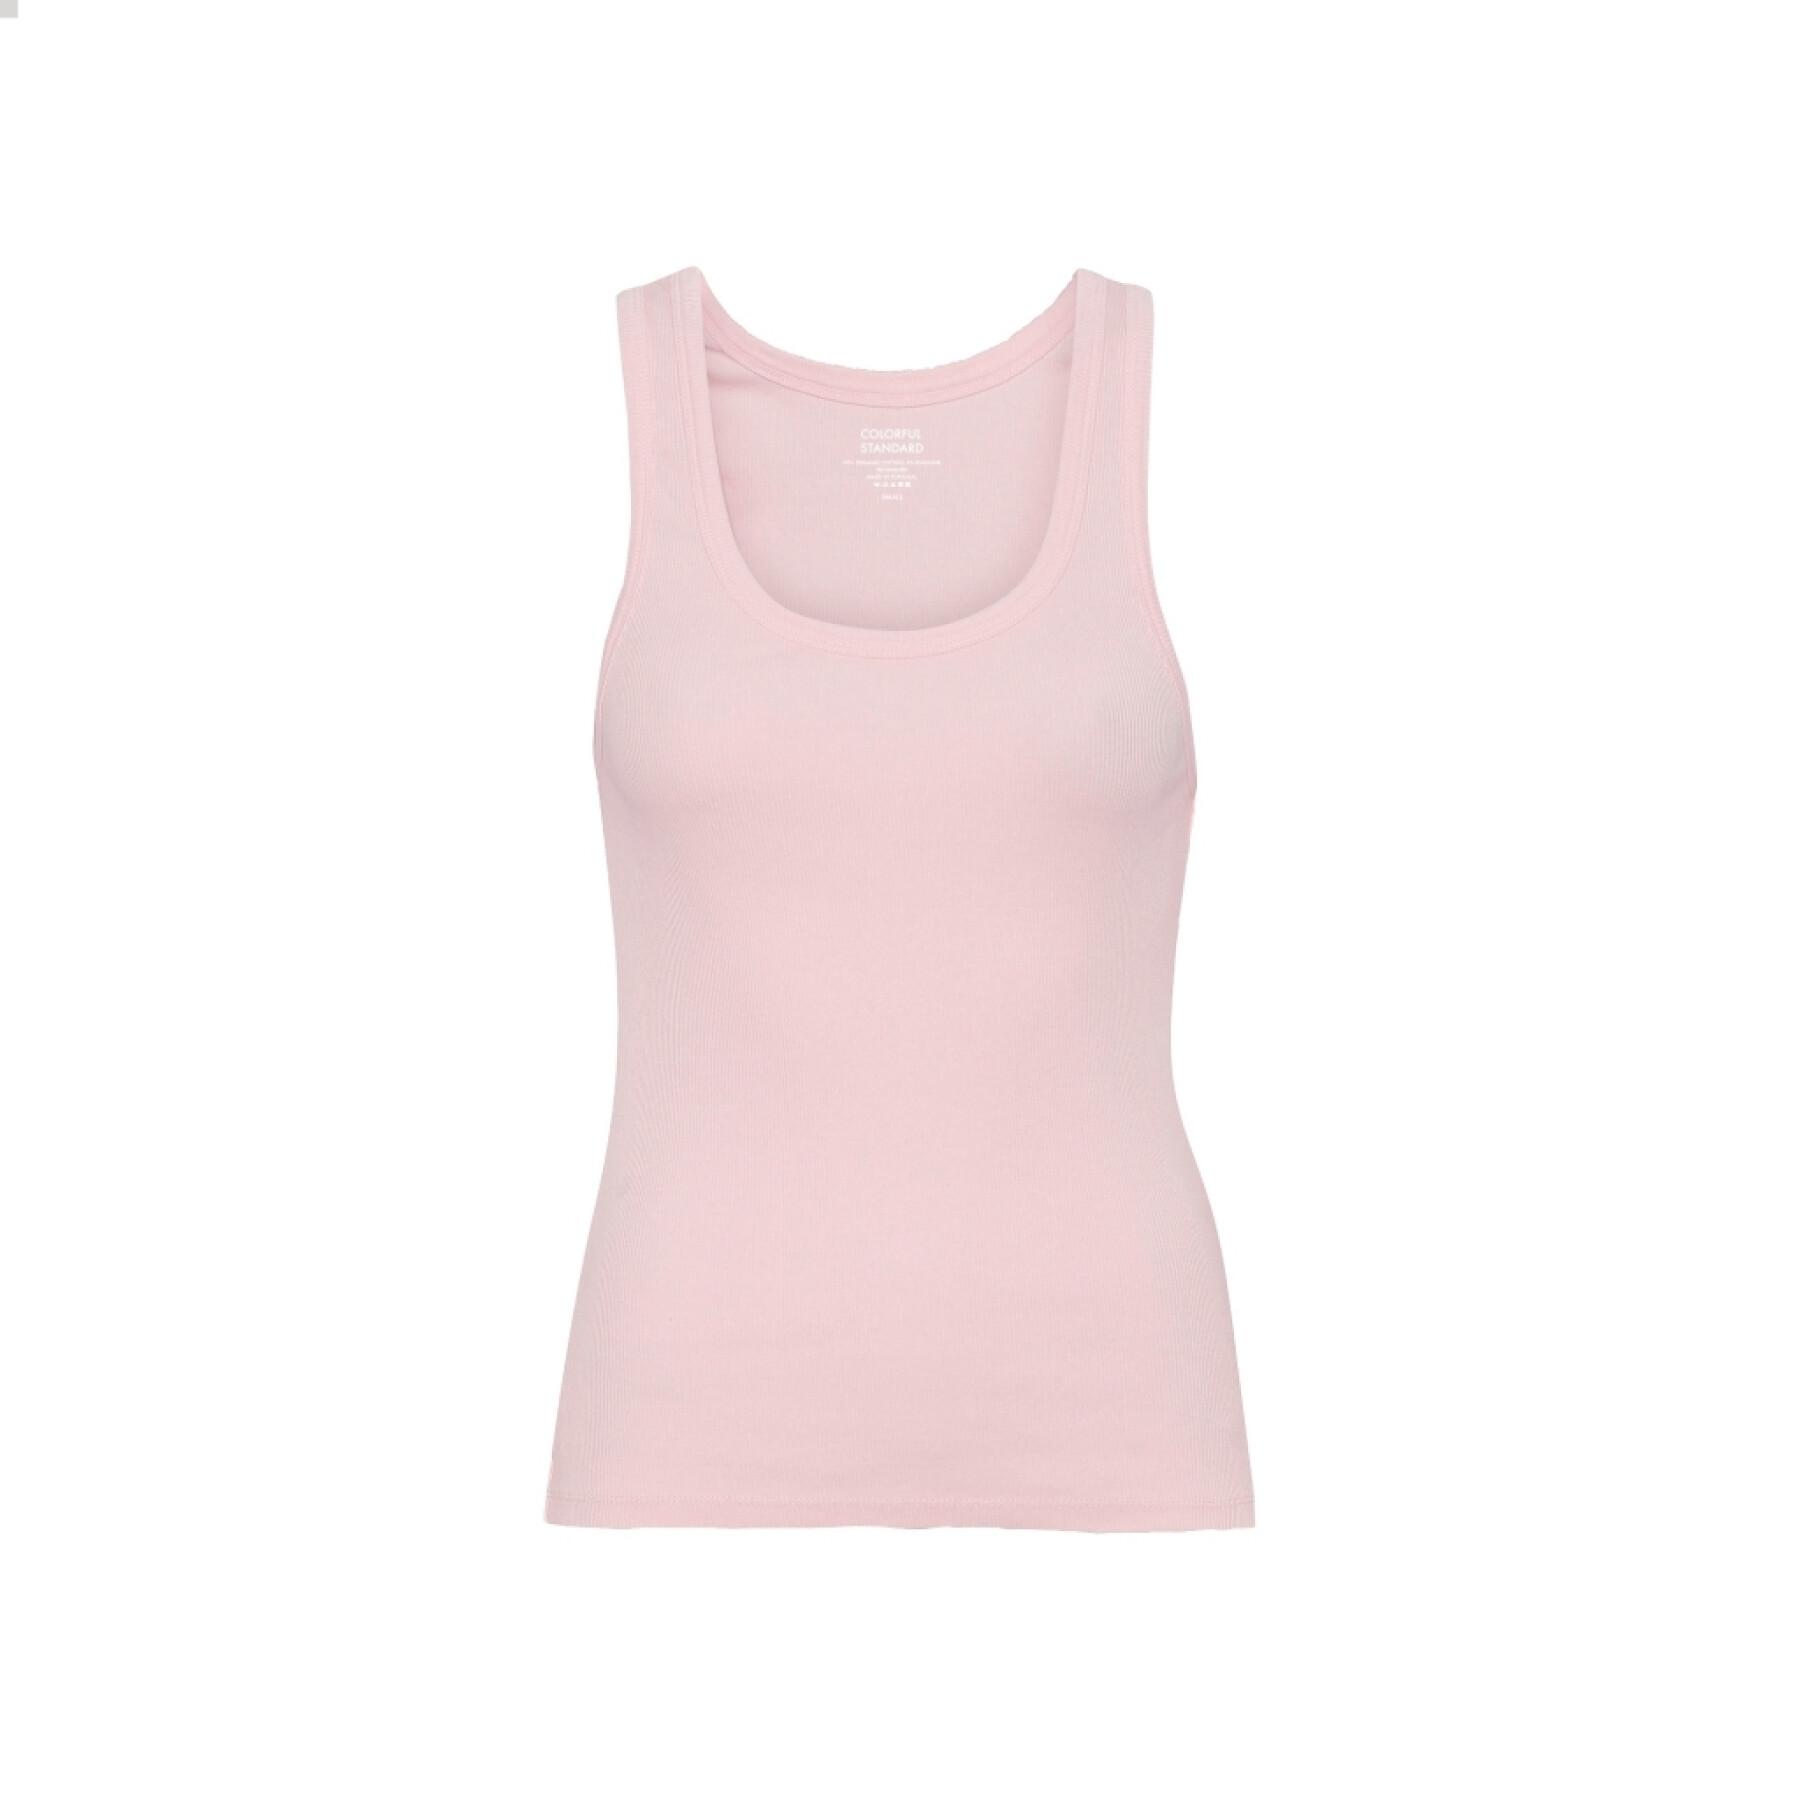 Women's ribbed tank top Colorful Standard Organic faded pink